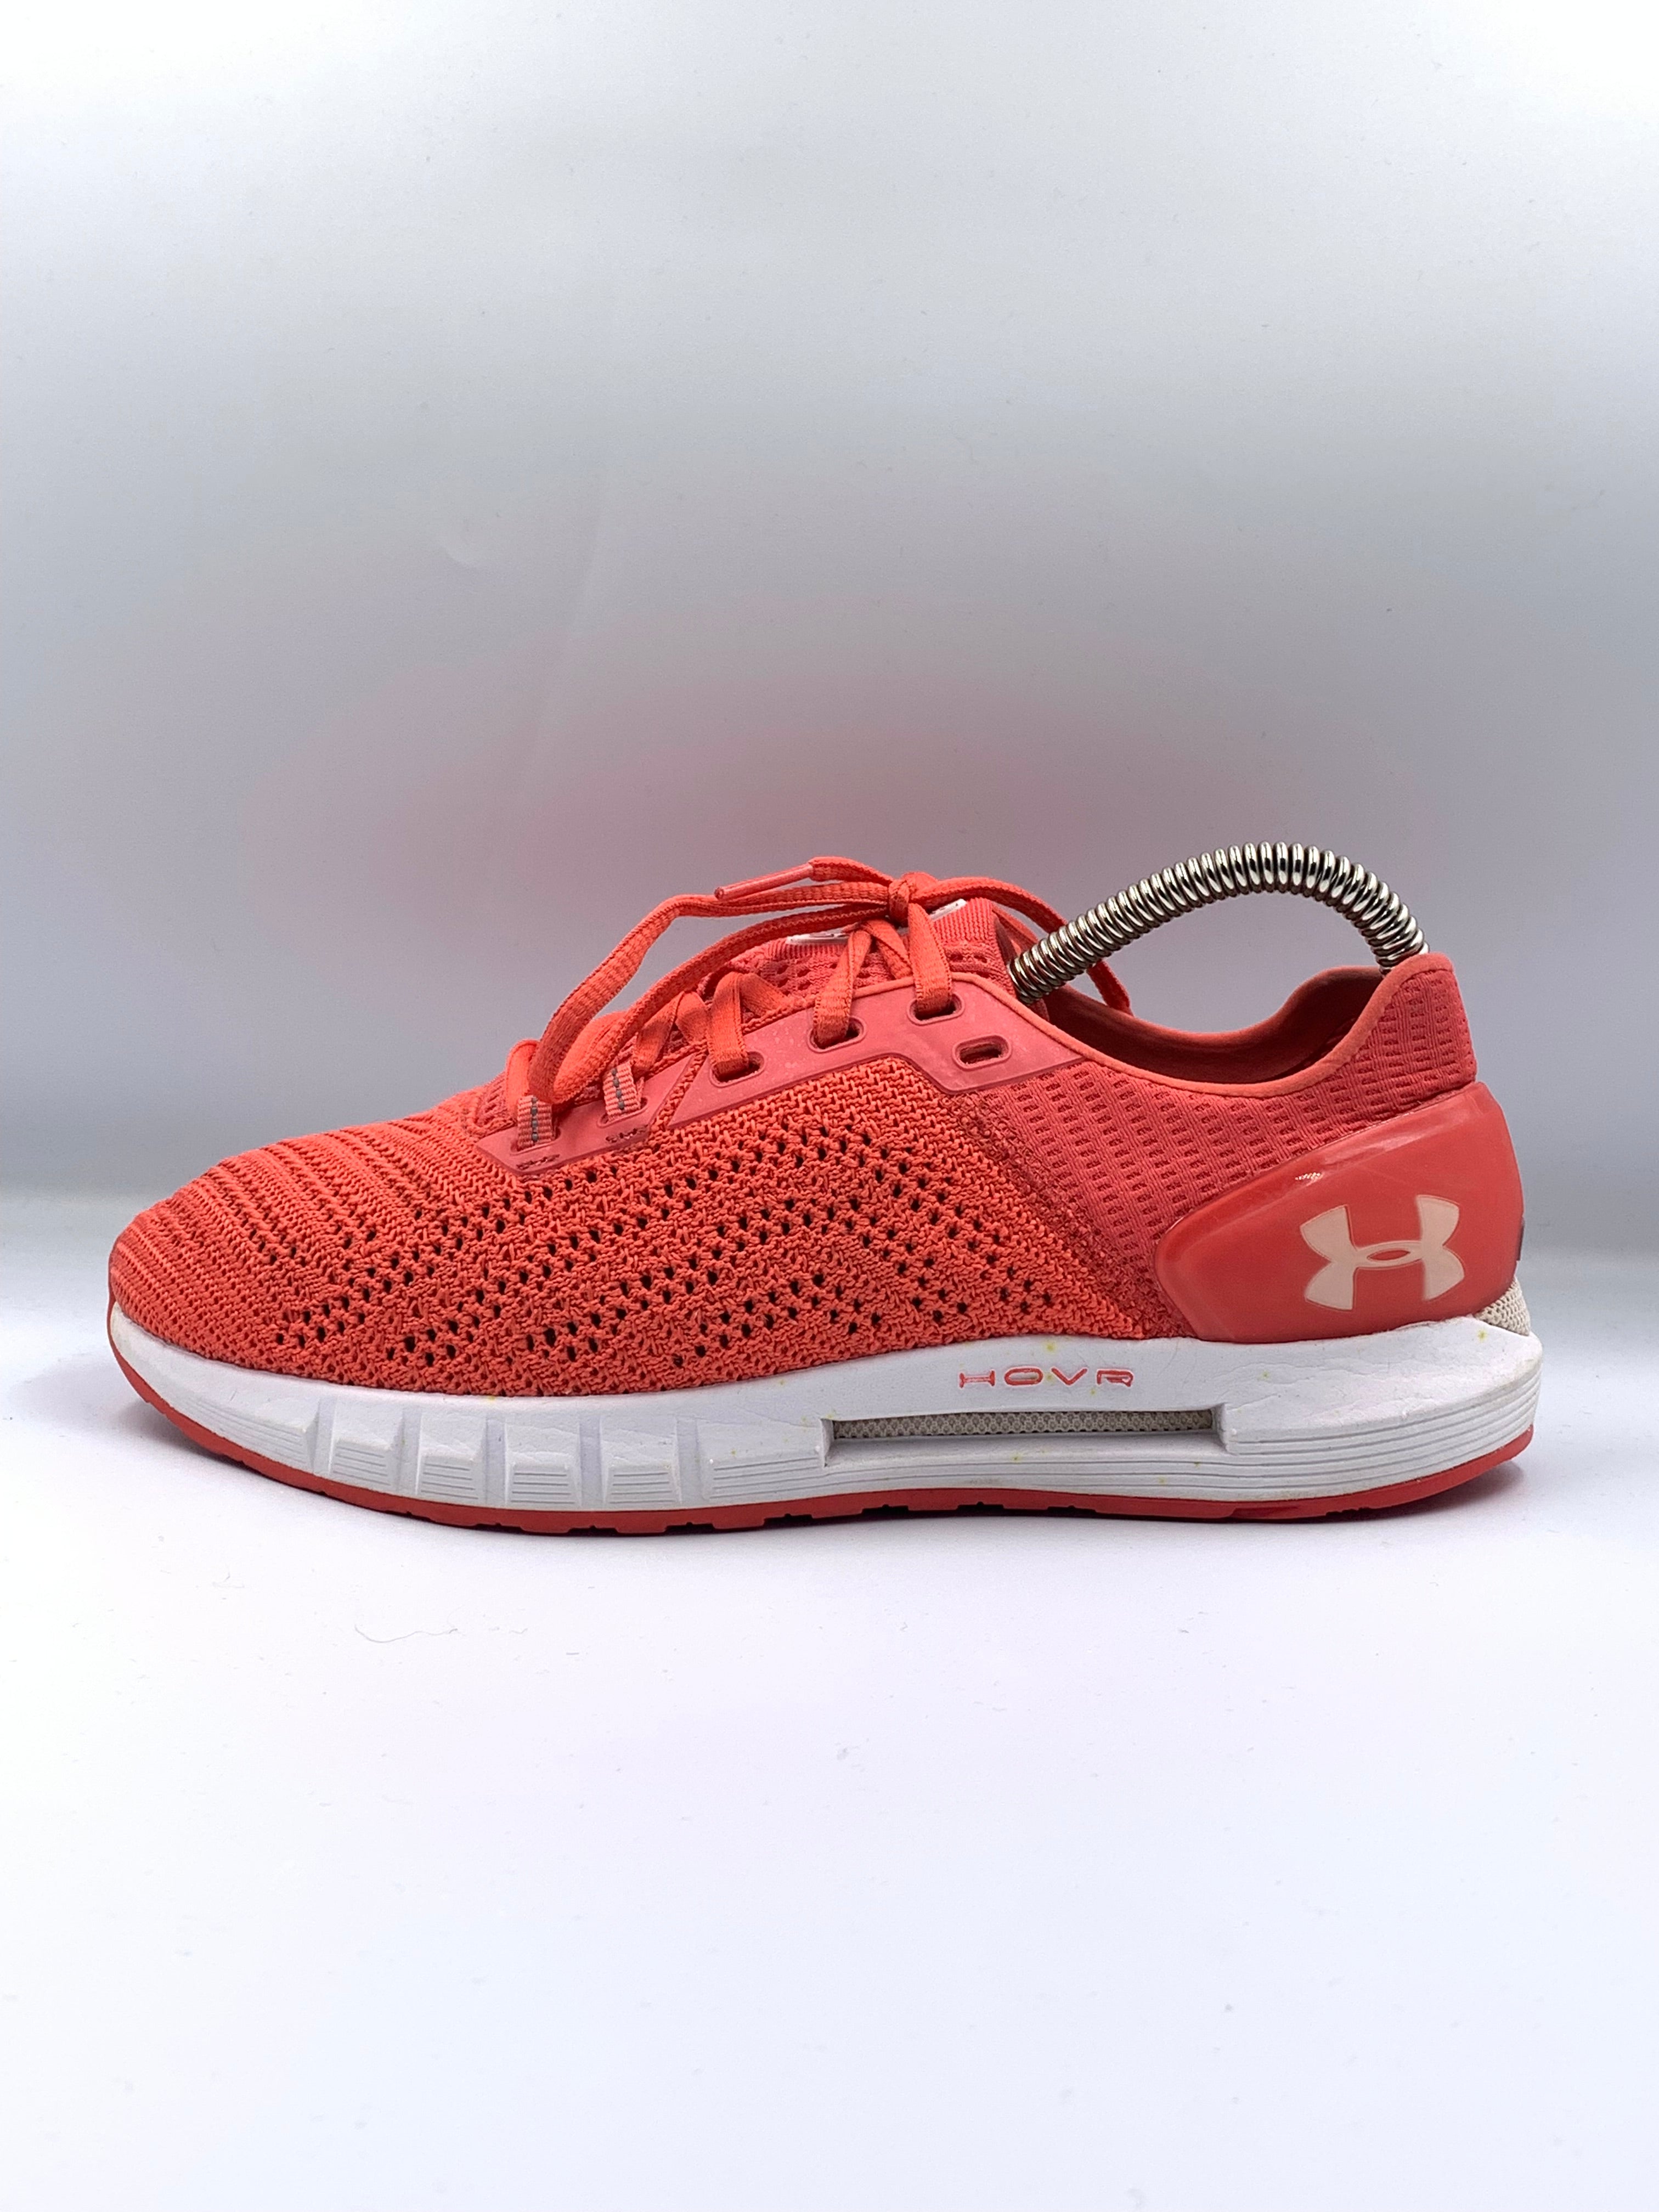 Under Armour Hovr Sonic Original Brand Sports Red Running For Women Shoes